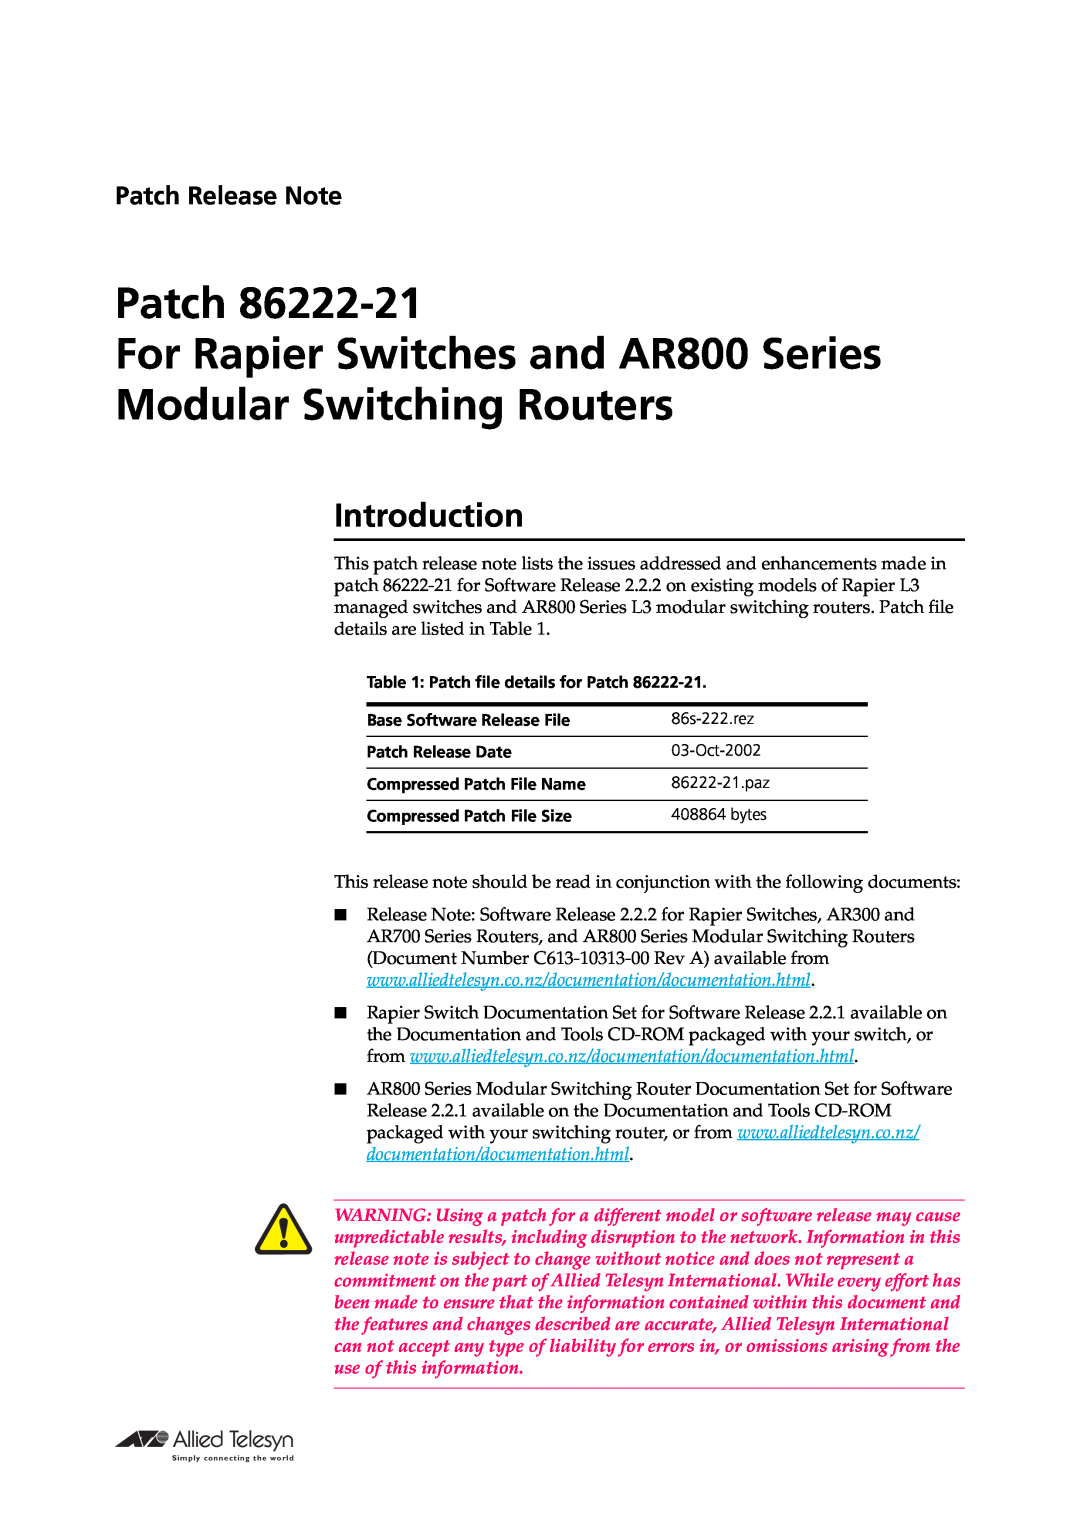 Allied Telesis 86222-21 manual Introduction, Patch For Rapier Switches and AR800 Series Modular Switching Routers 